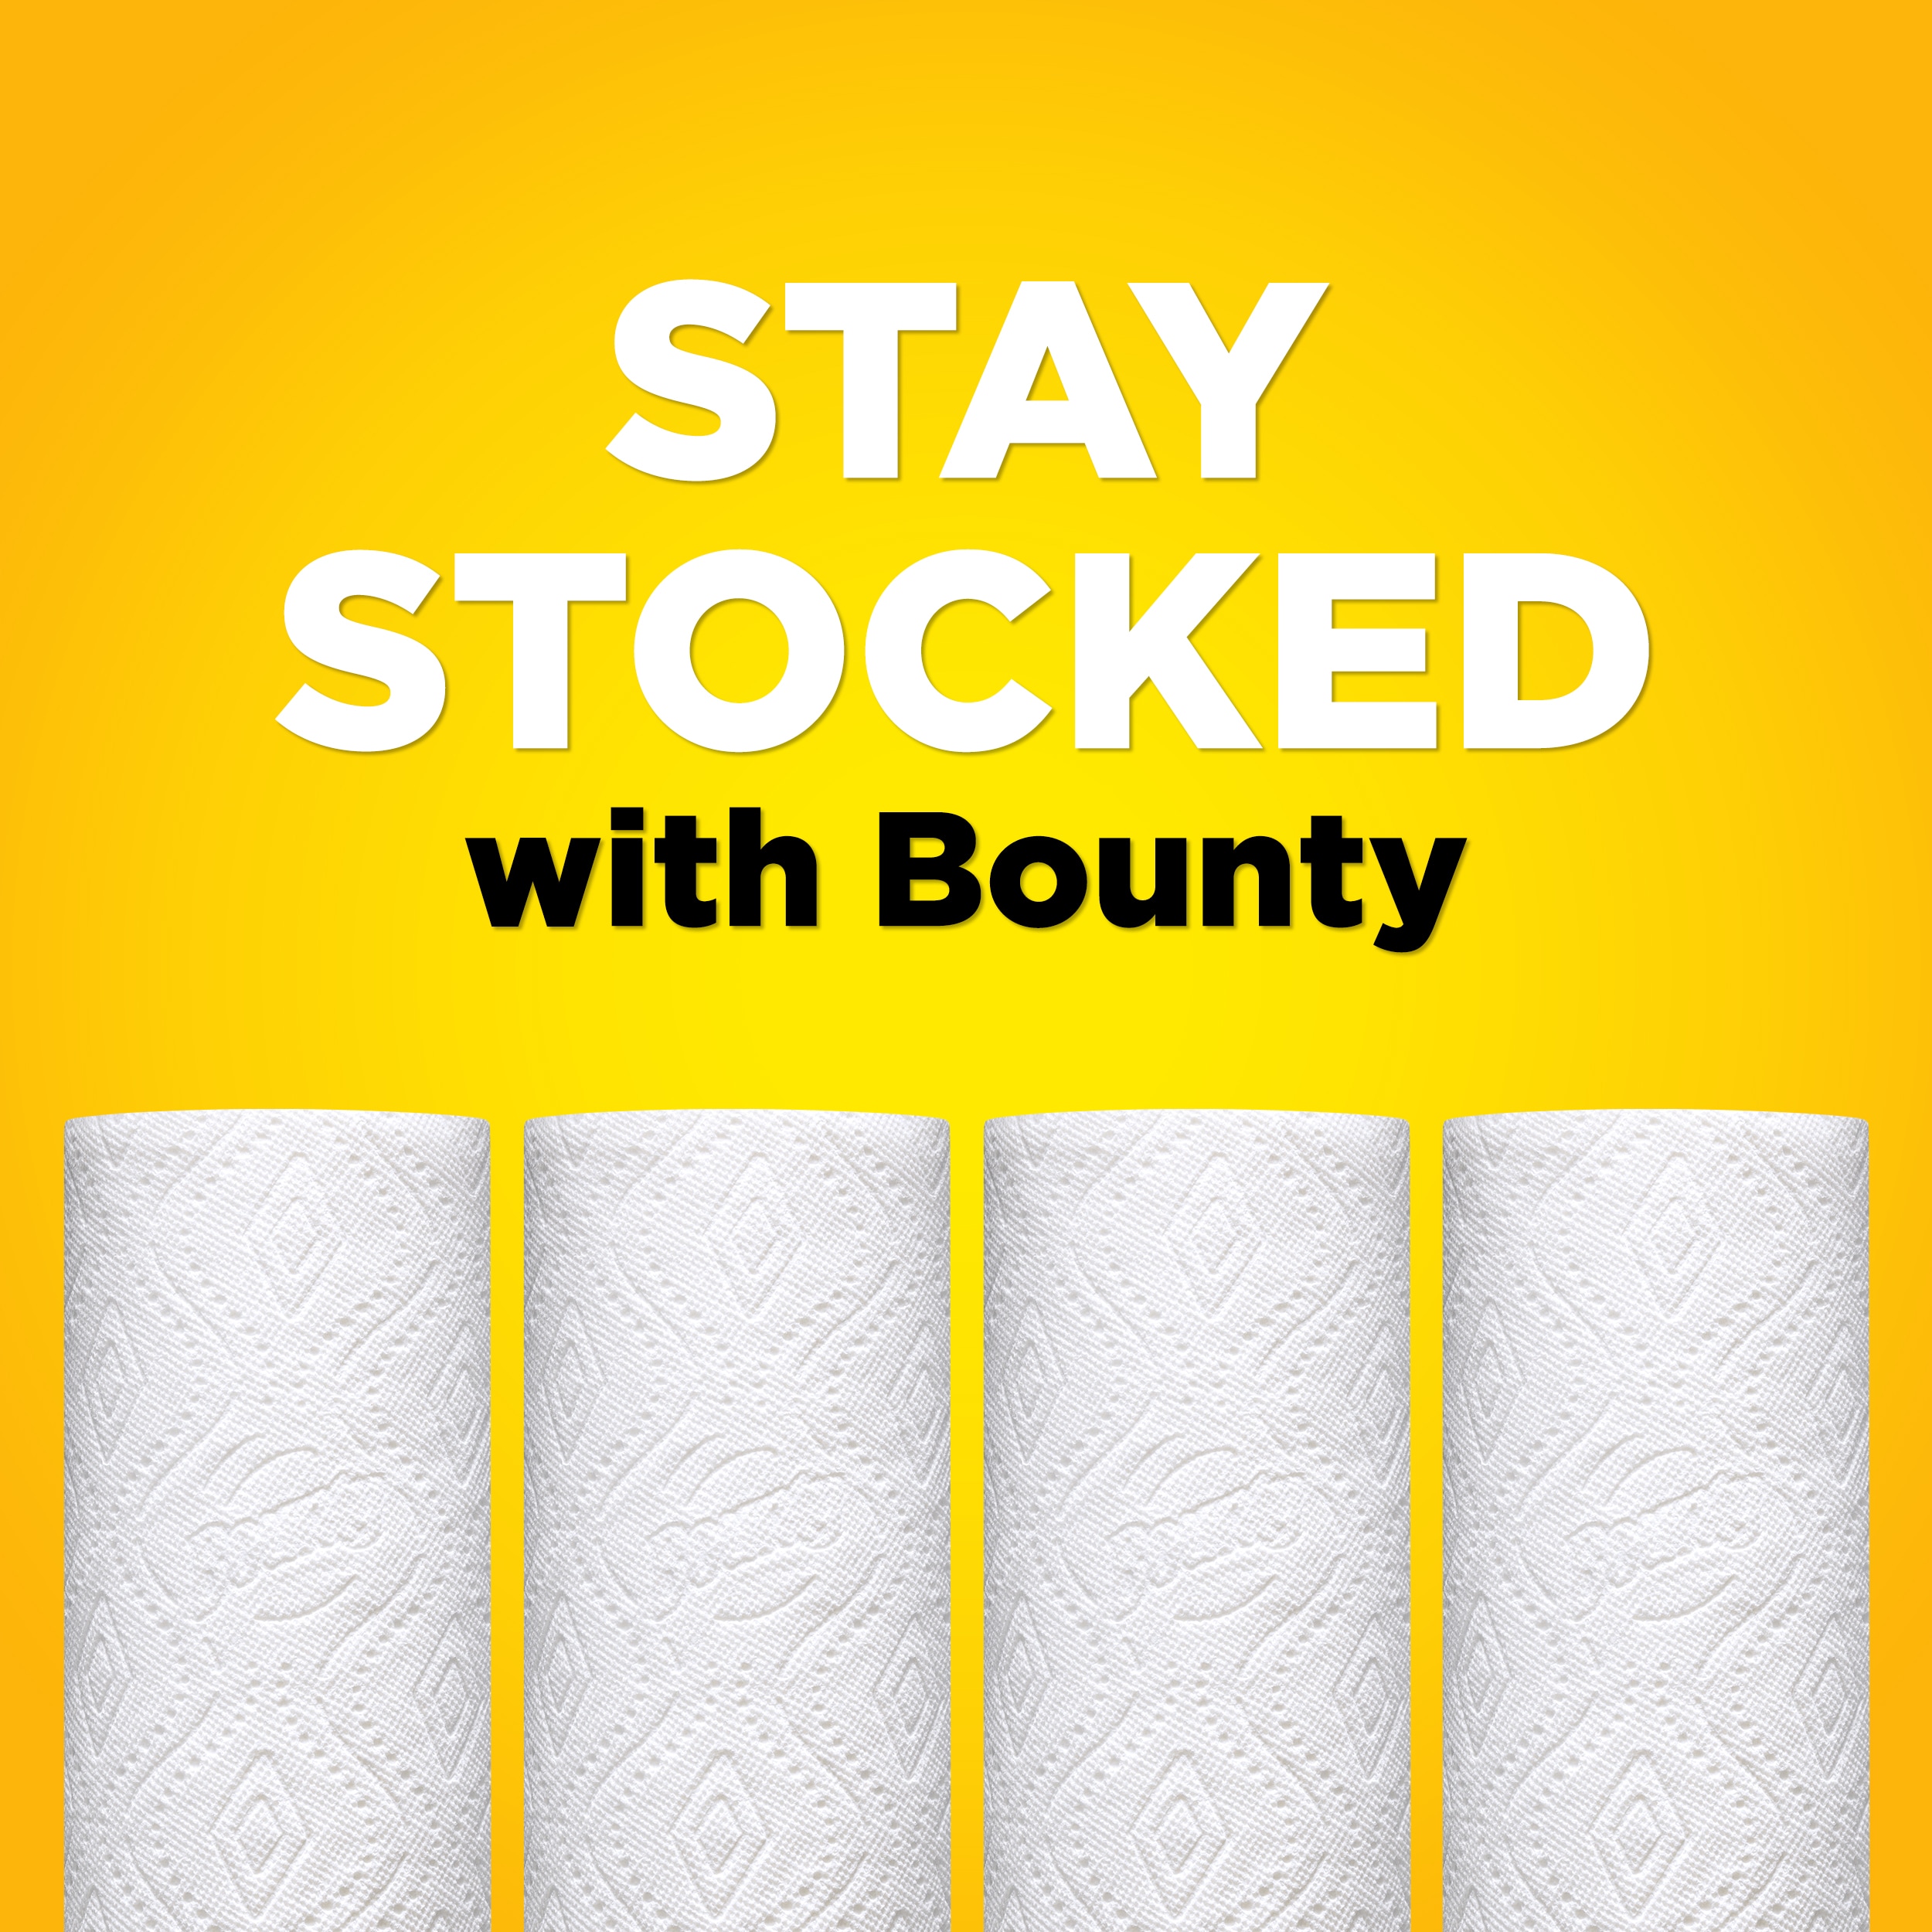 Bounty Paper Towels – tommys supplies